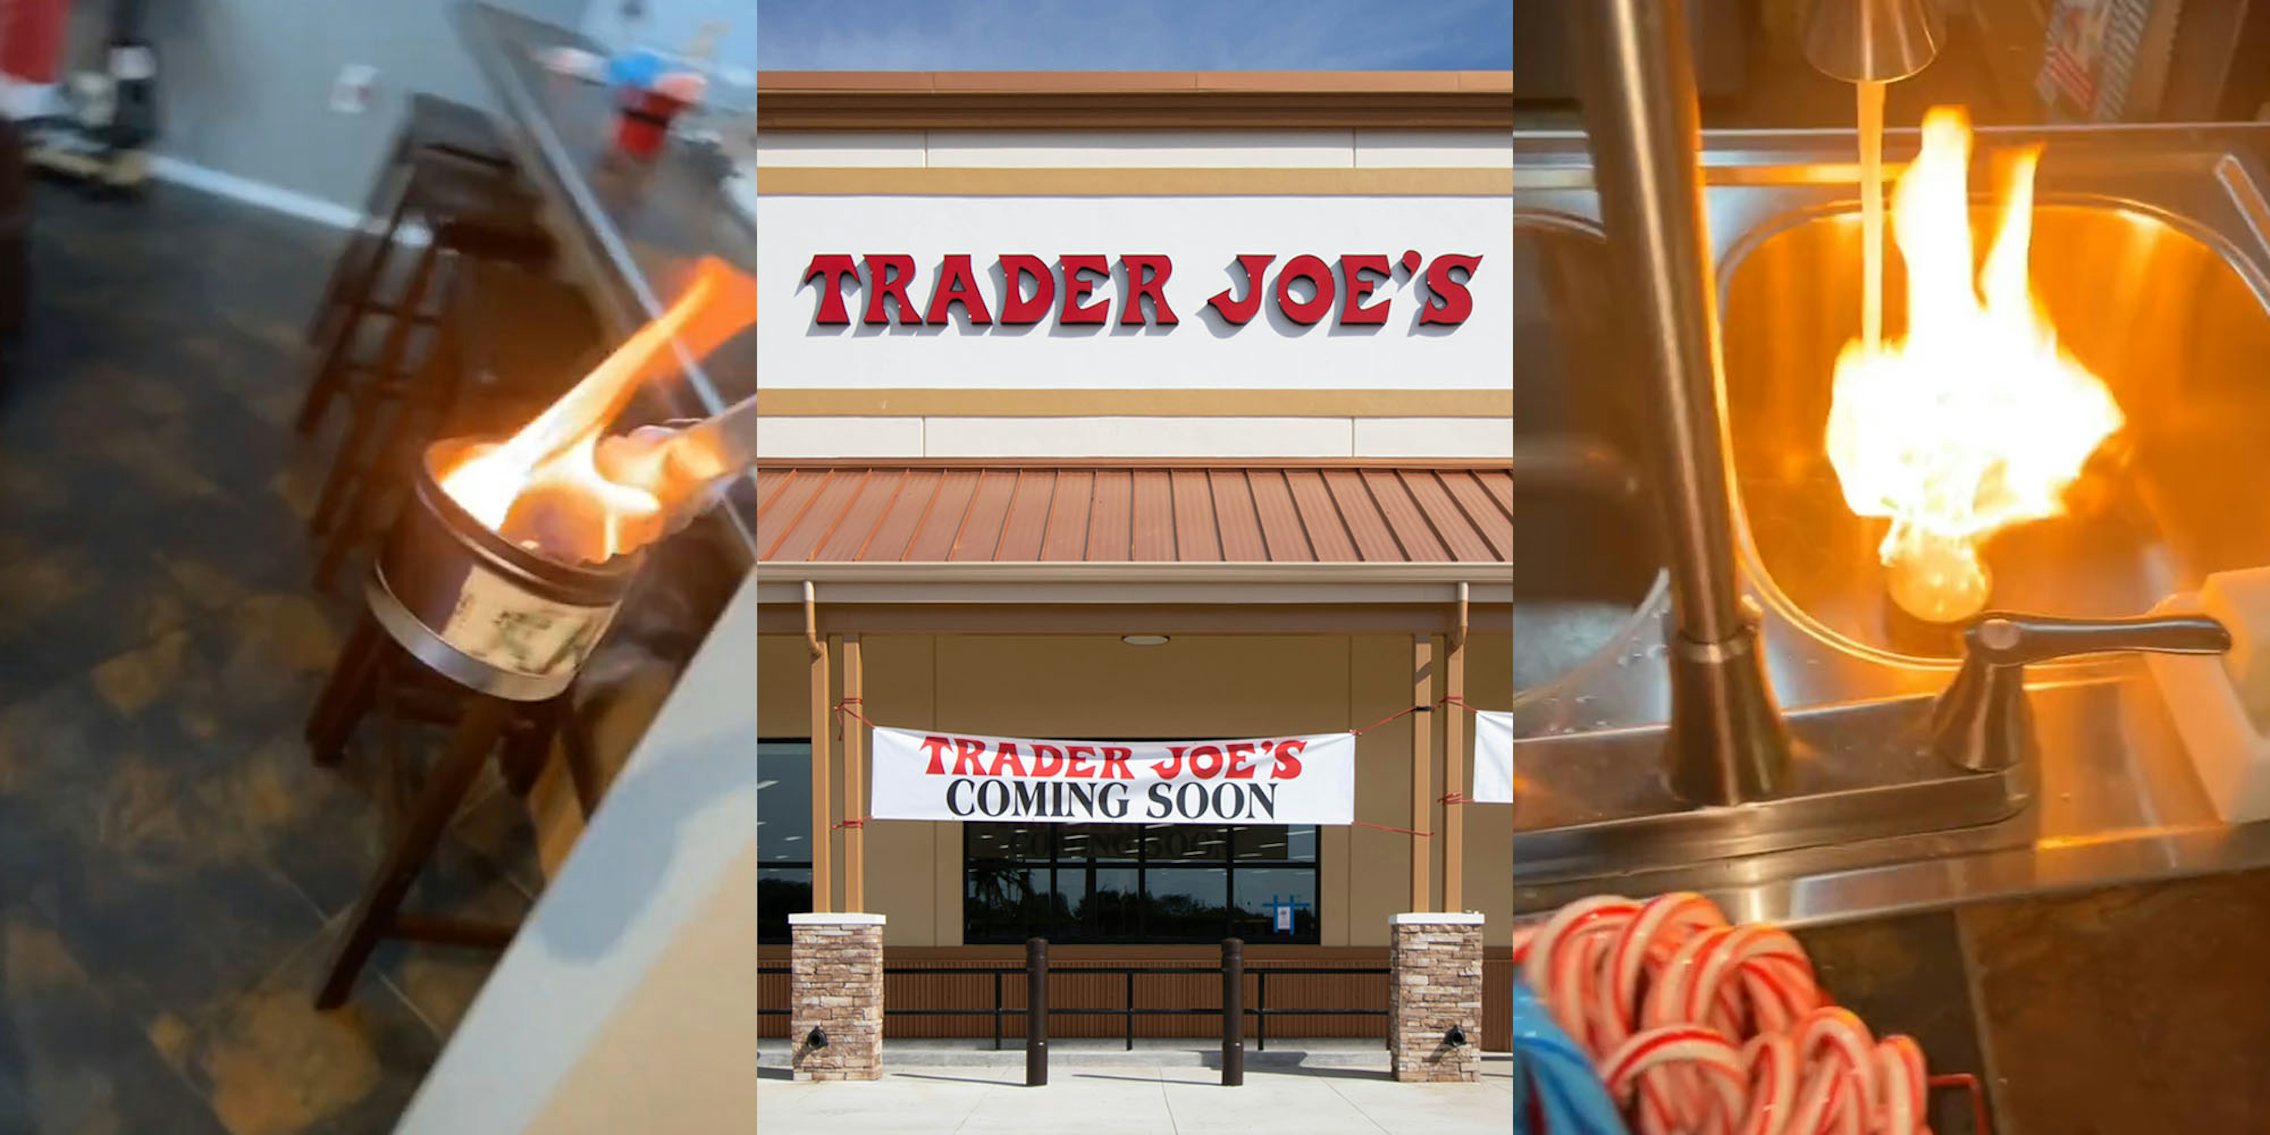 candle with high flame being carried to sink (l) Trader Joe's sign on building (c) candle with high flame in sink with faucet turned on (r)